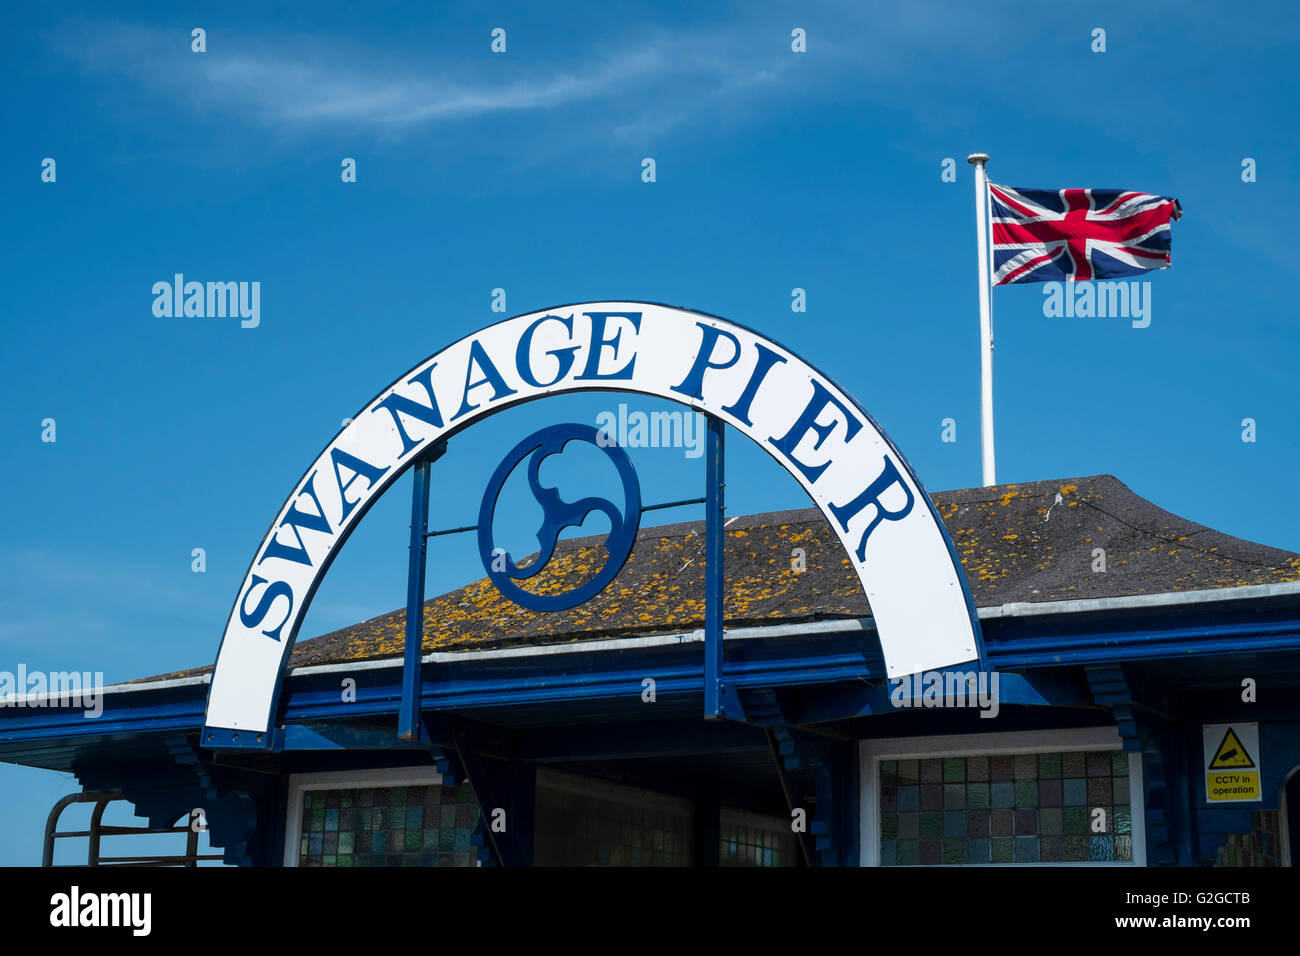 Swanage a small seaside town on the english Dorset coast Swanage Pier  sign Stock Photo